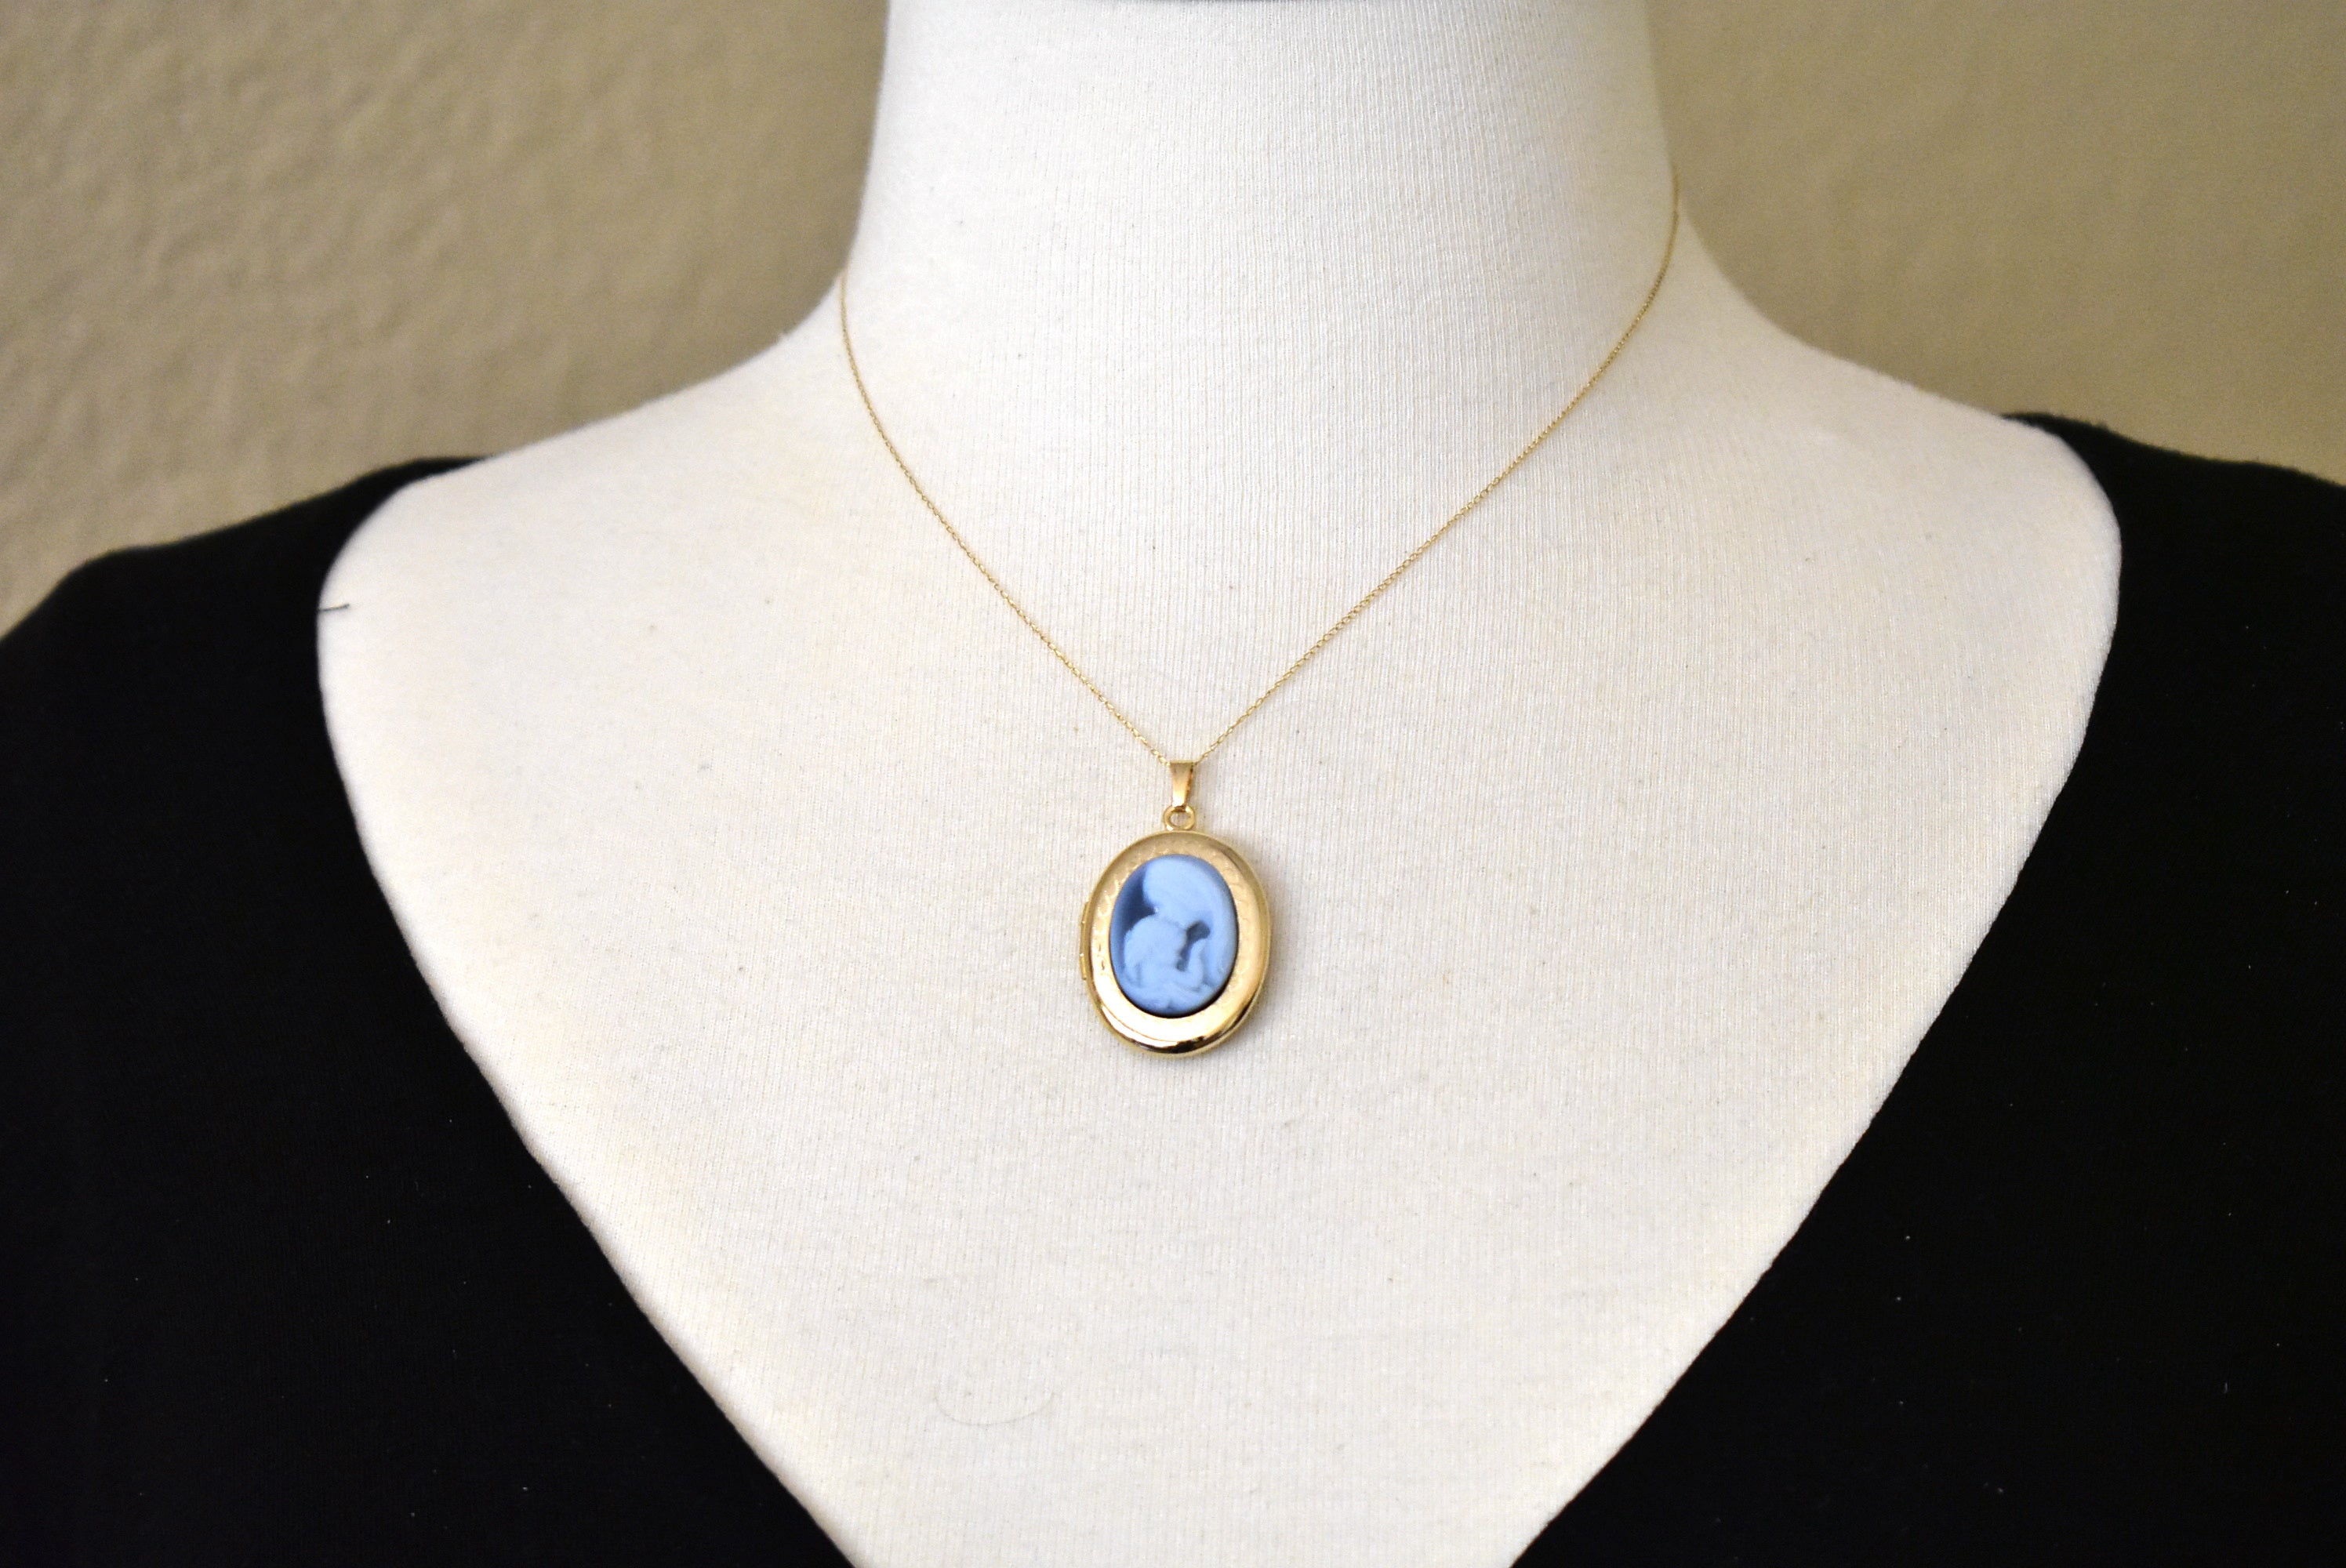 14k Yellow Gold Mother Child Blue Agate Cameo Oval Locket Pendant Charm Personalized Engraved Monogram